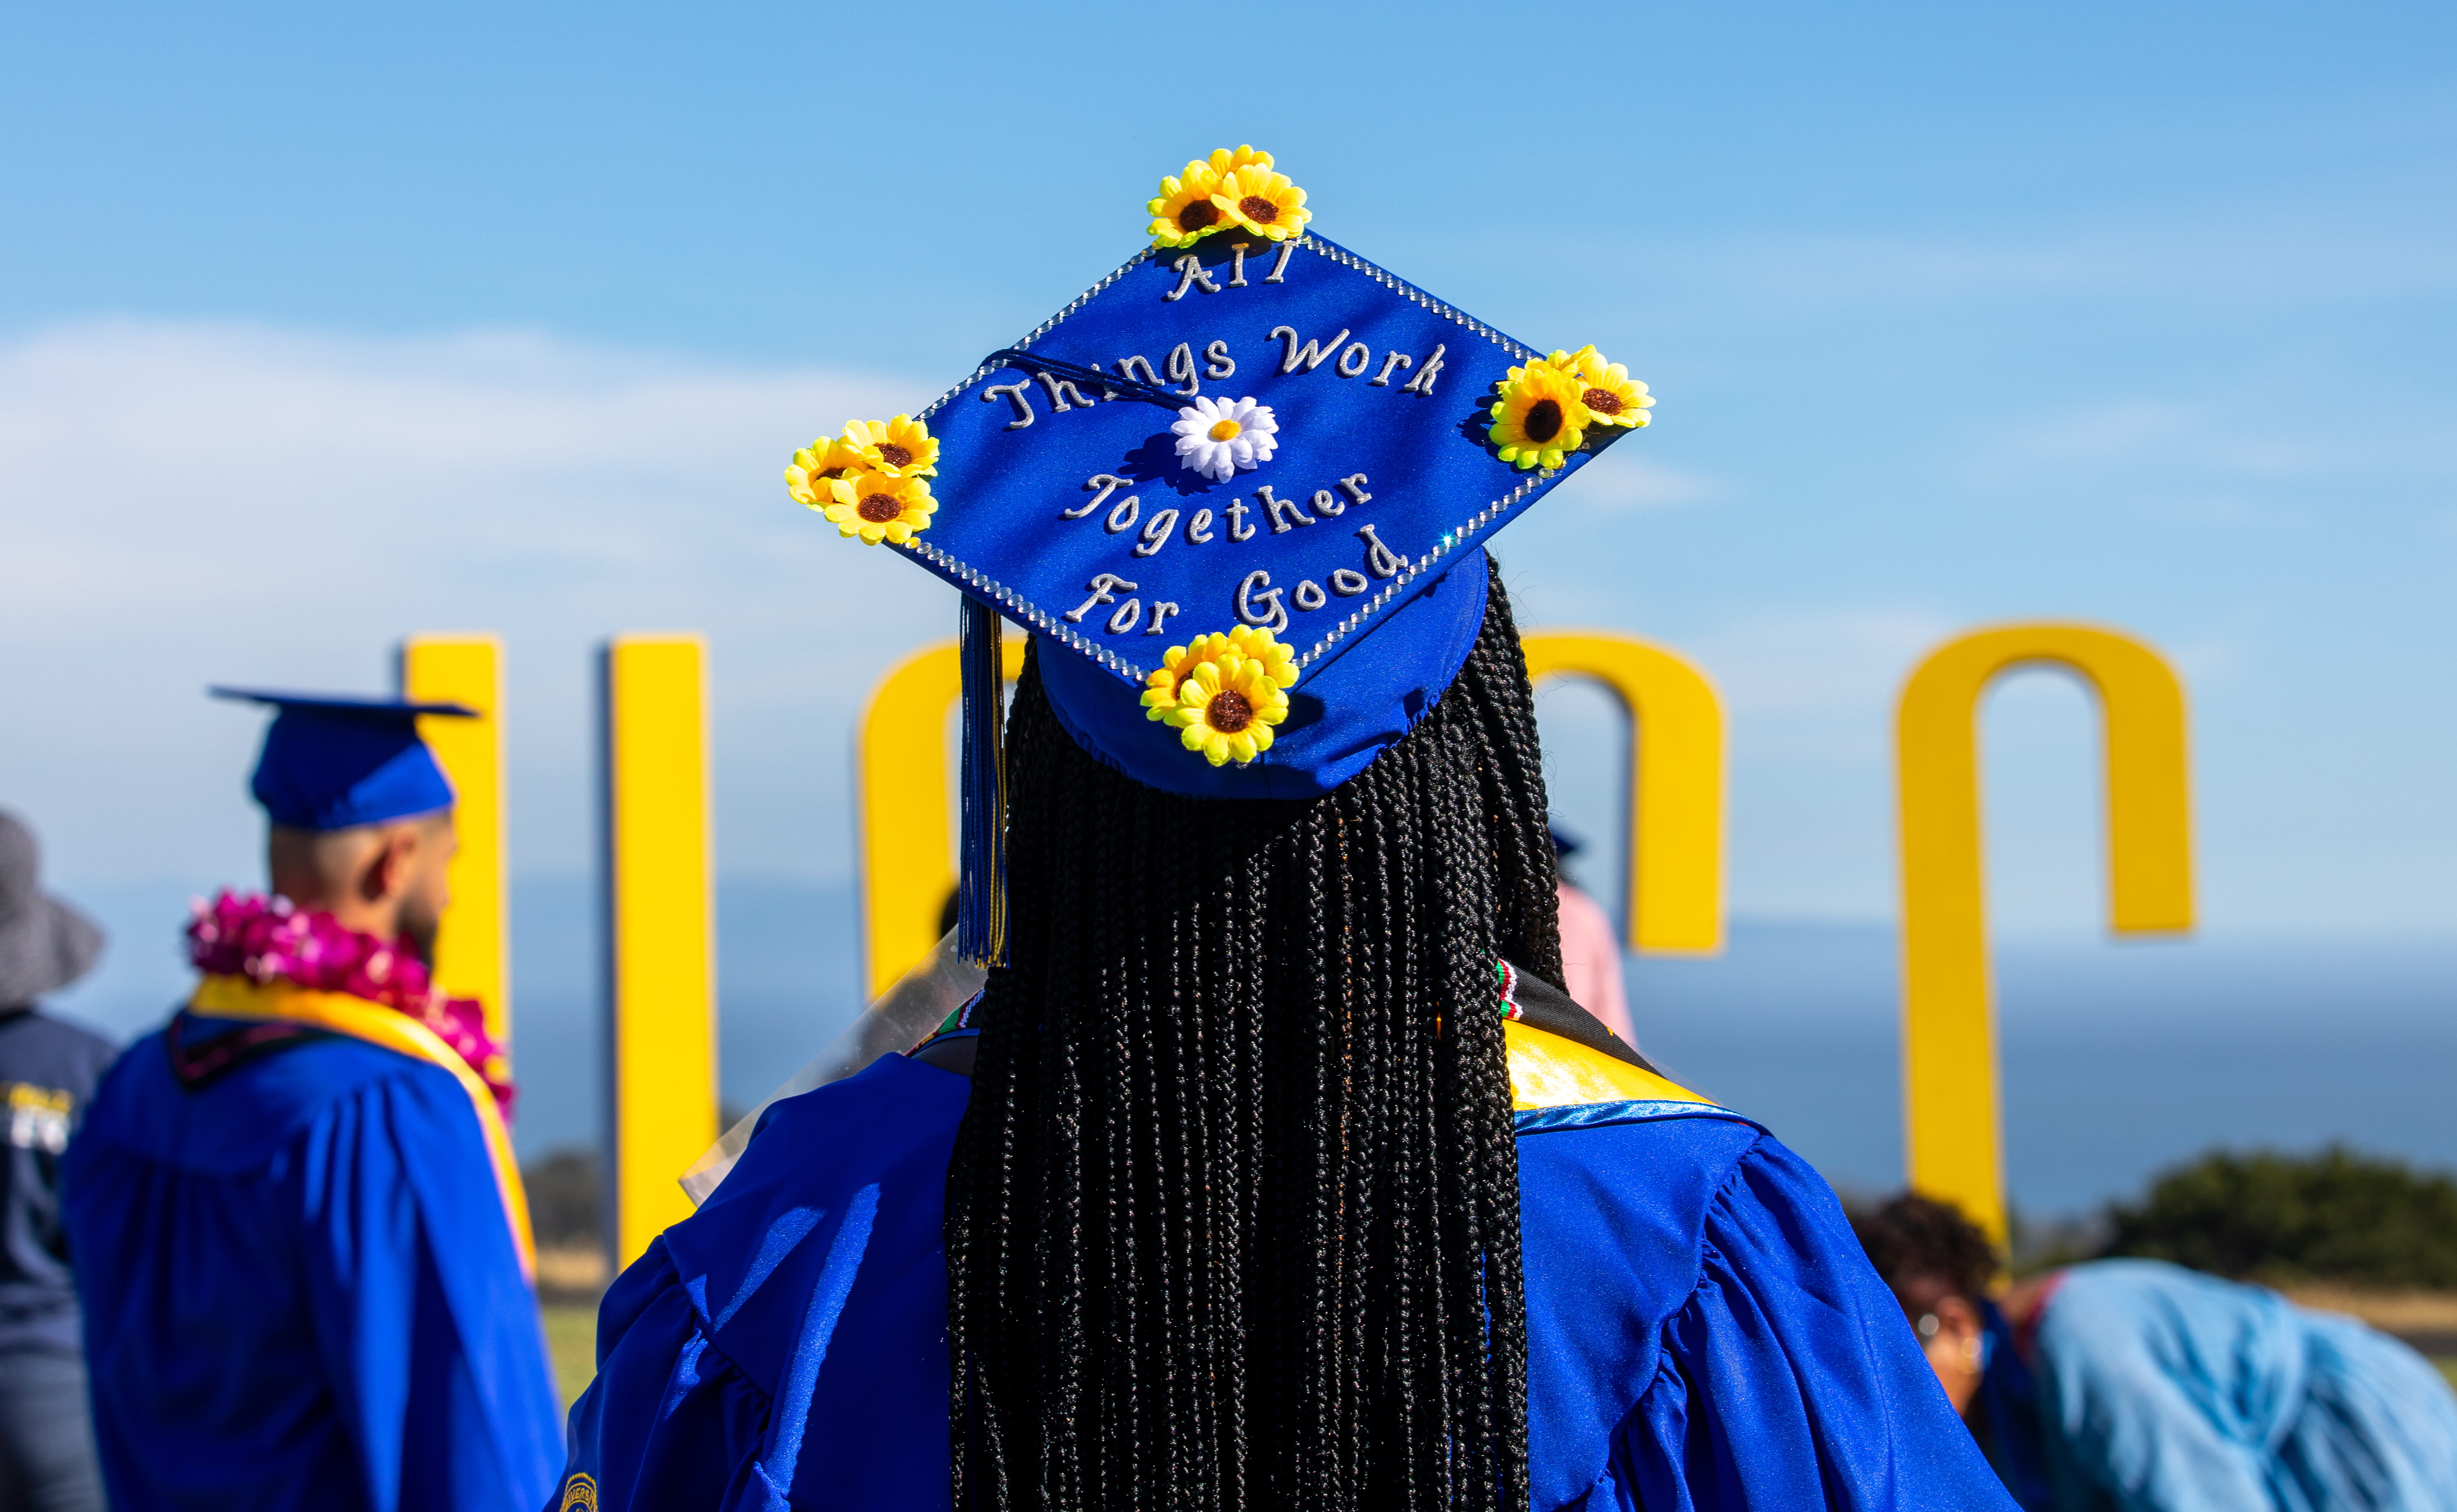 View of student wearing graduation cap from behind with UCSC logo in background